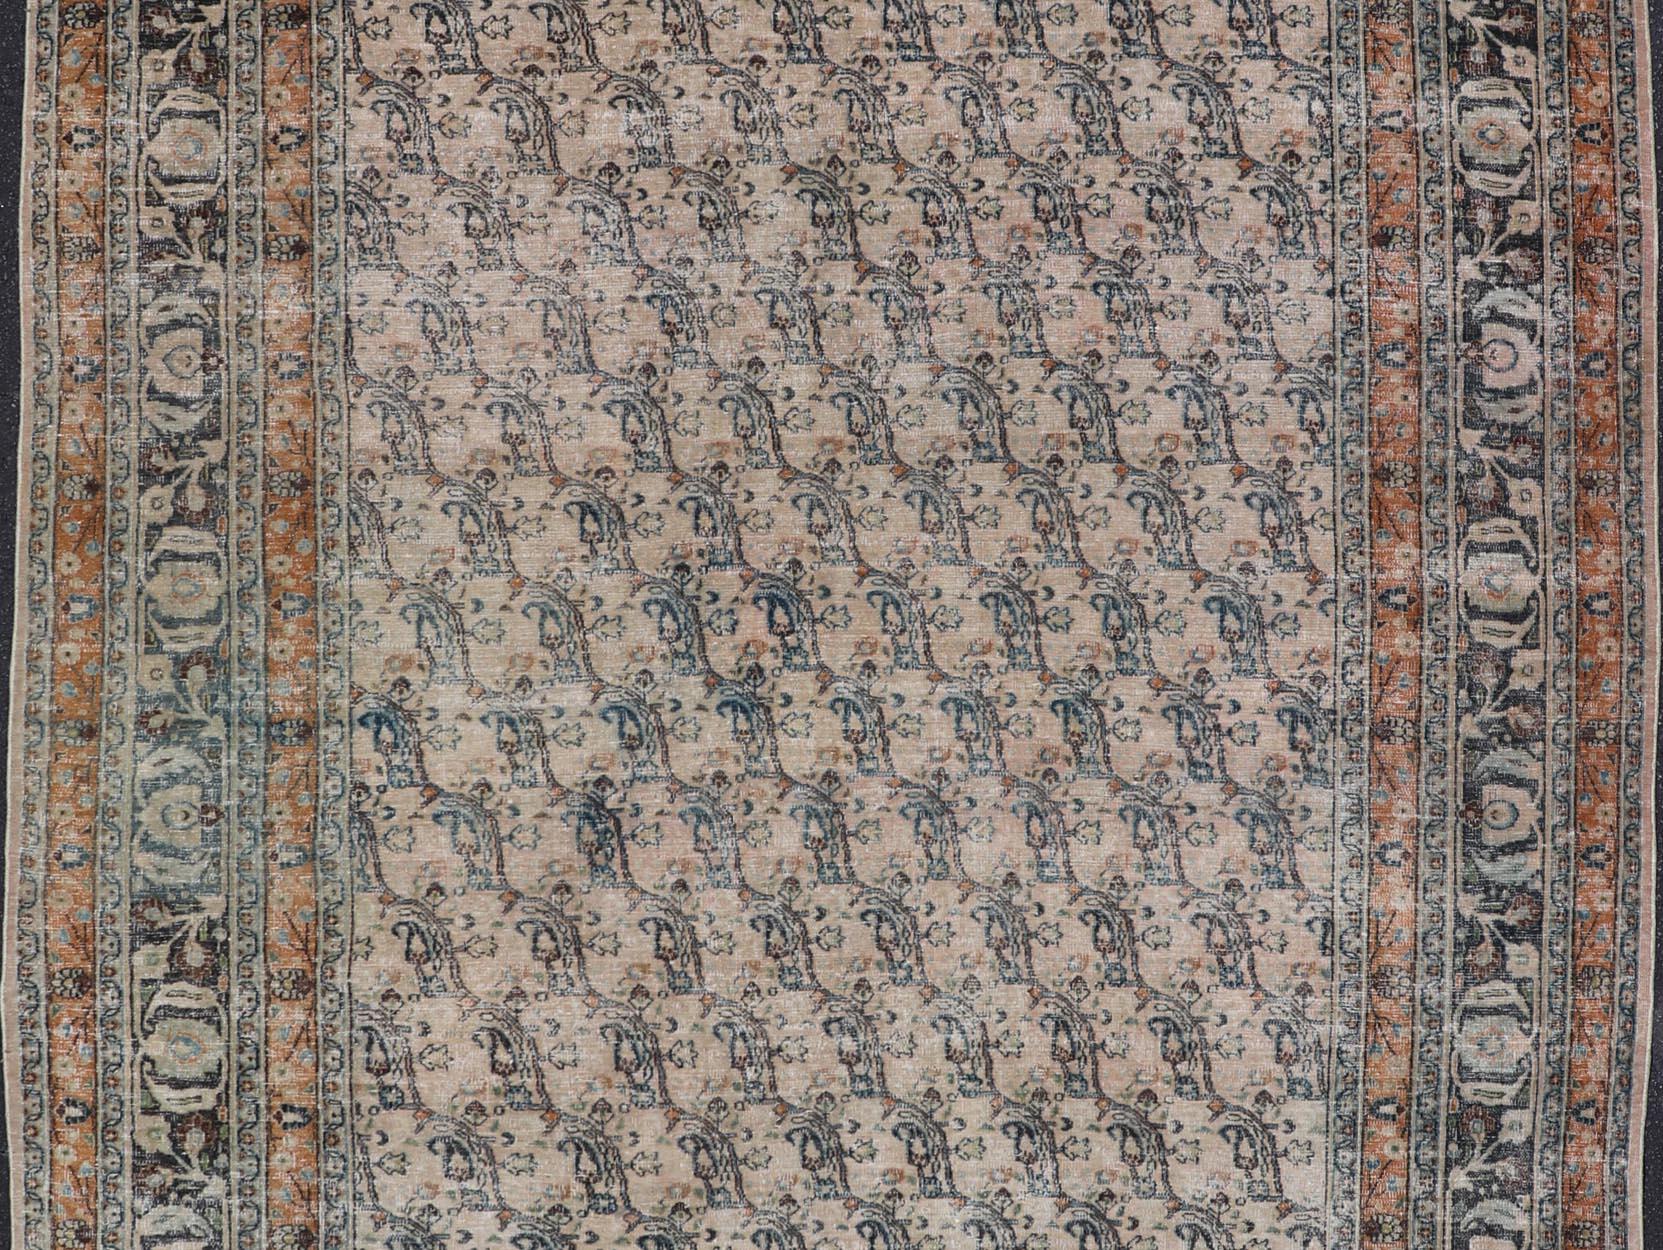 Antique N.E Persian Khorasan Rug In Diagonal Paisley Design with Gray & Sand For Sale 4